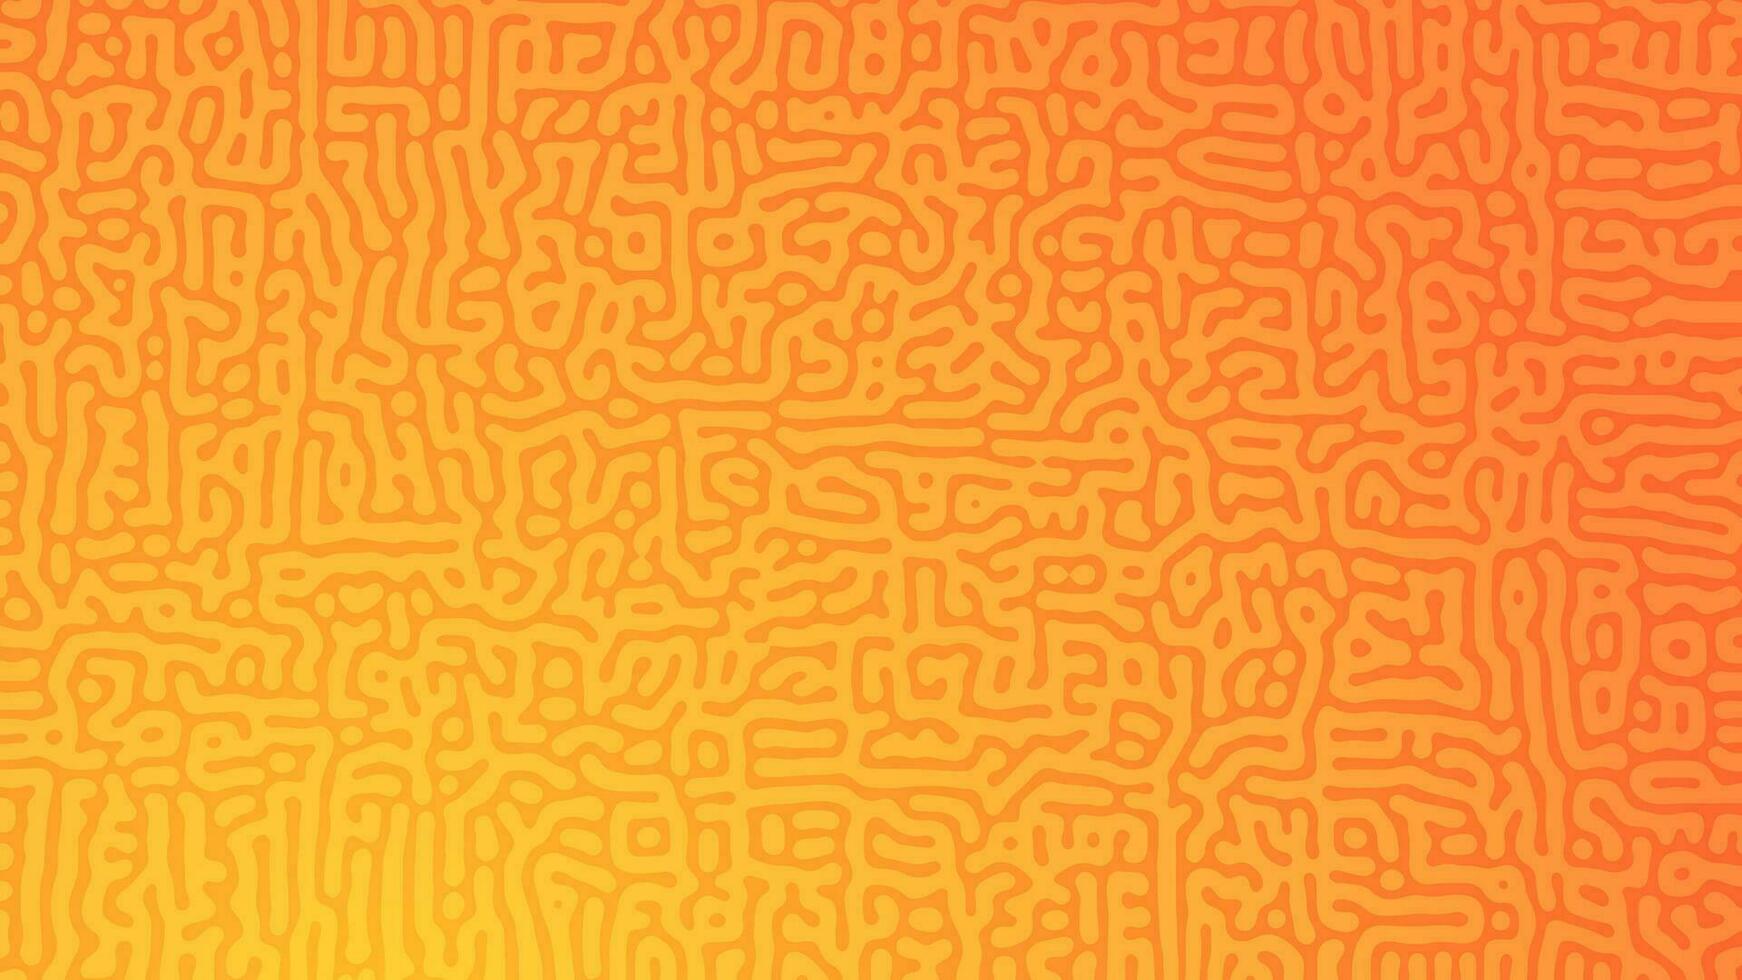 Orange Turing reaction gradient background. Abstract diffusion pattern with chaotic shapes. Vector illustration.